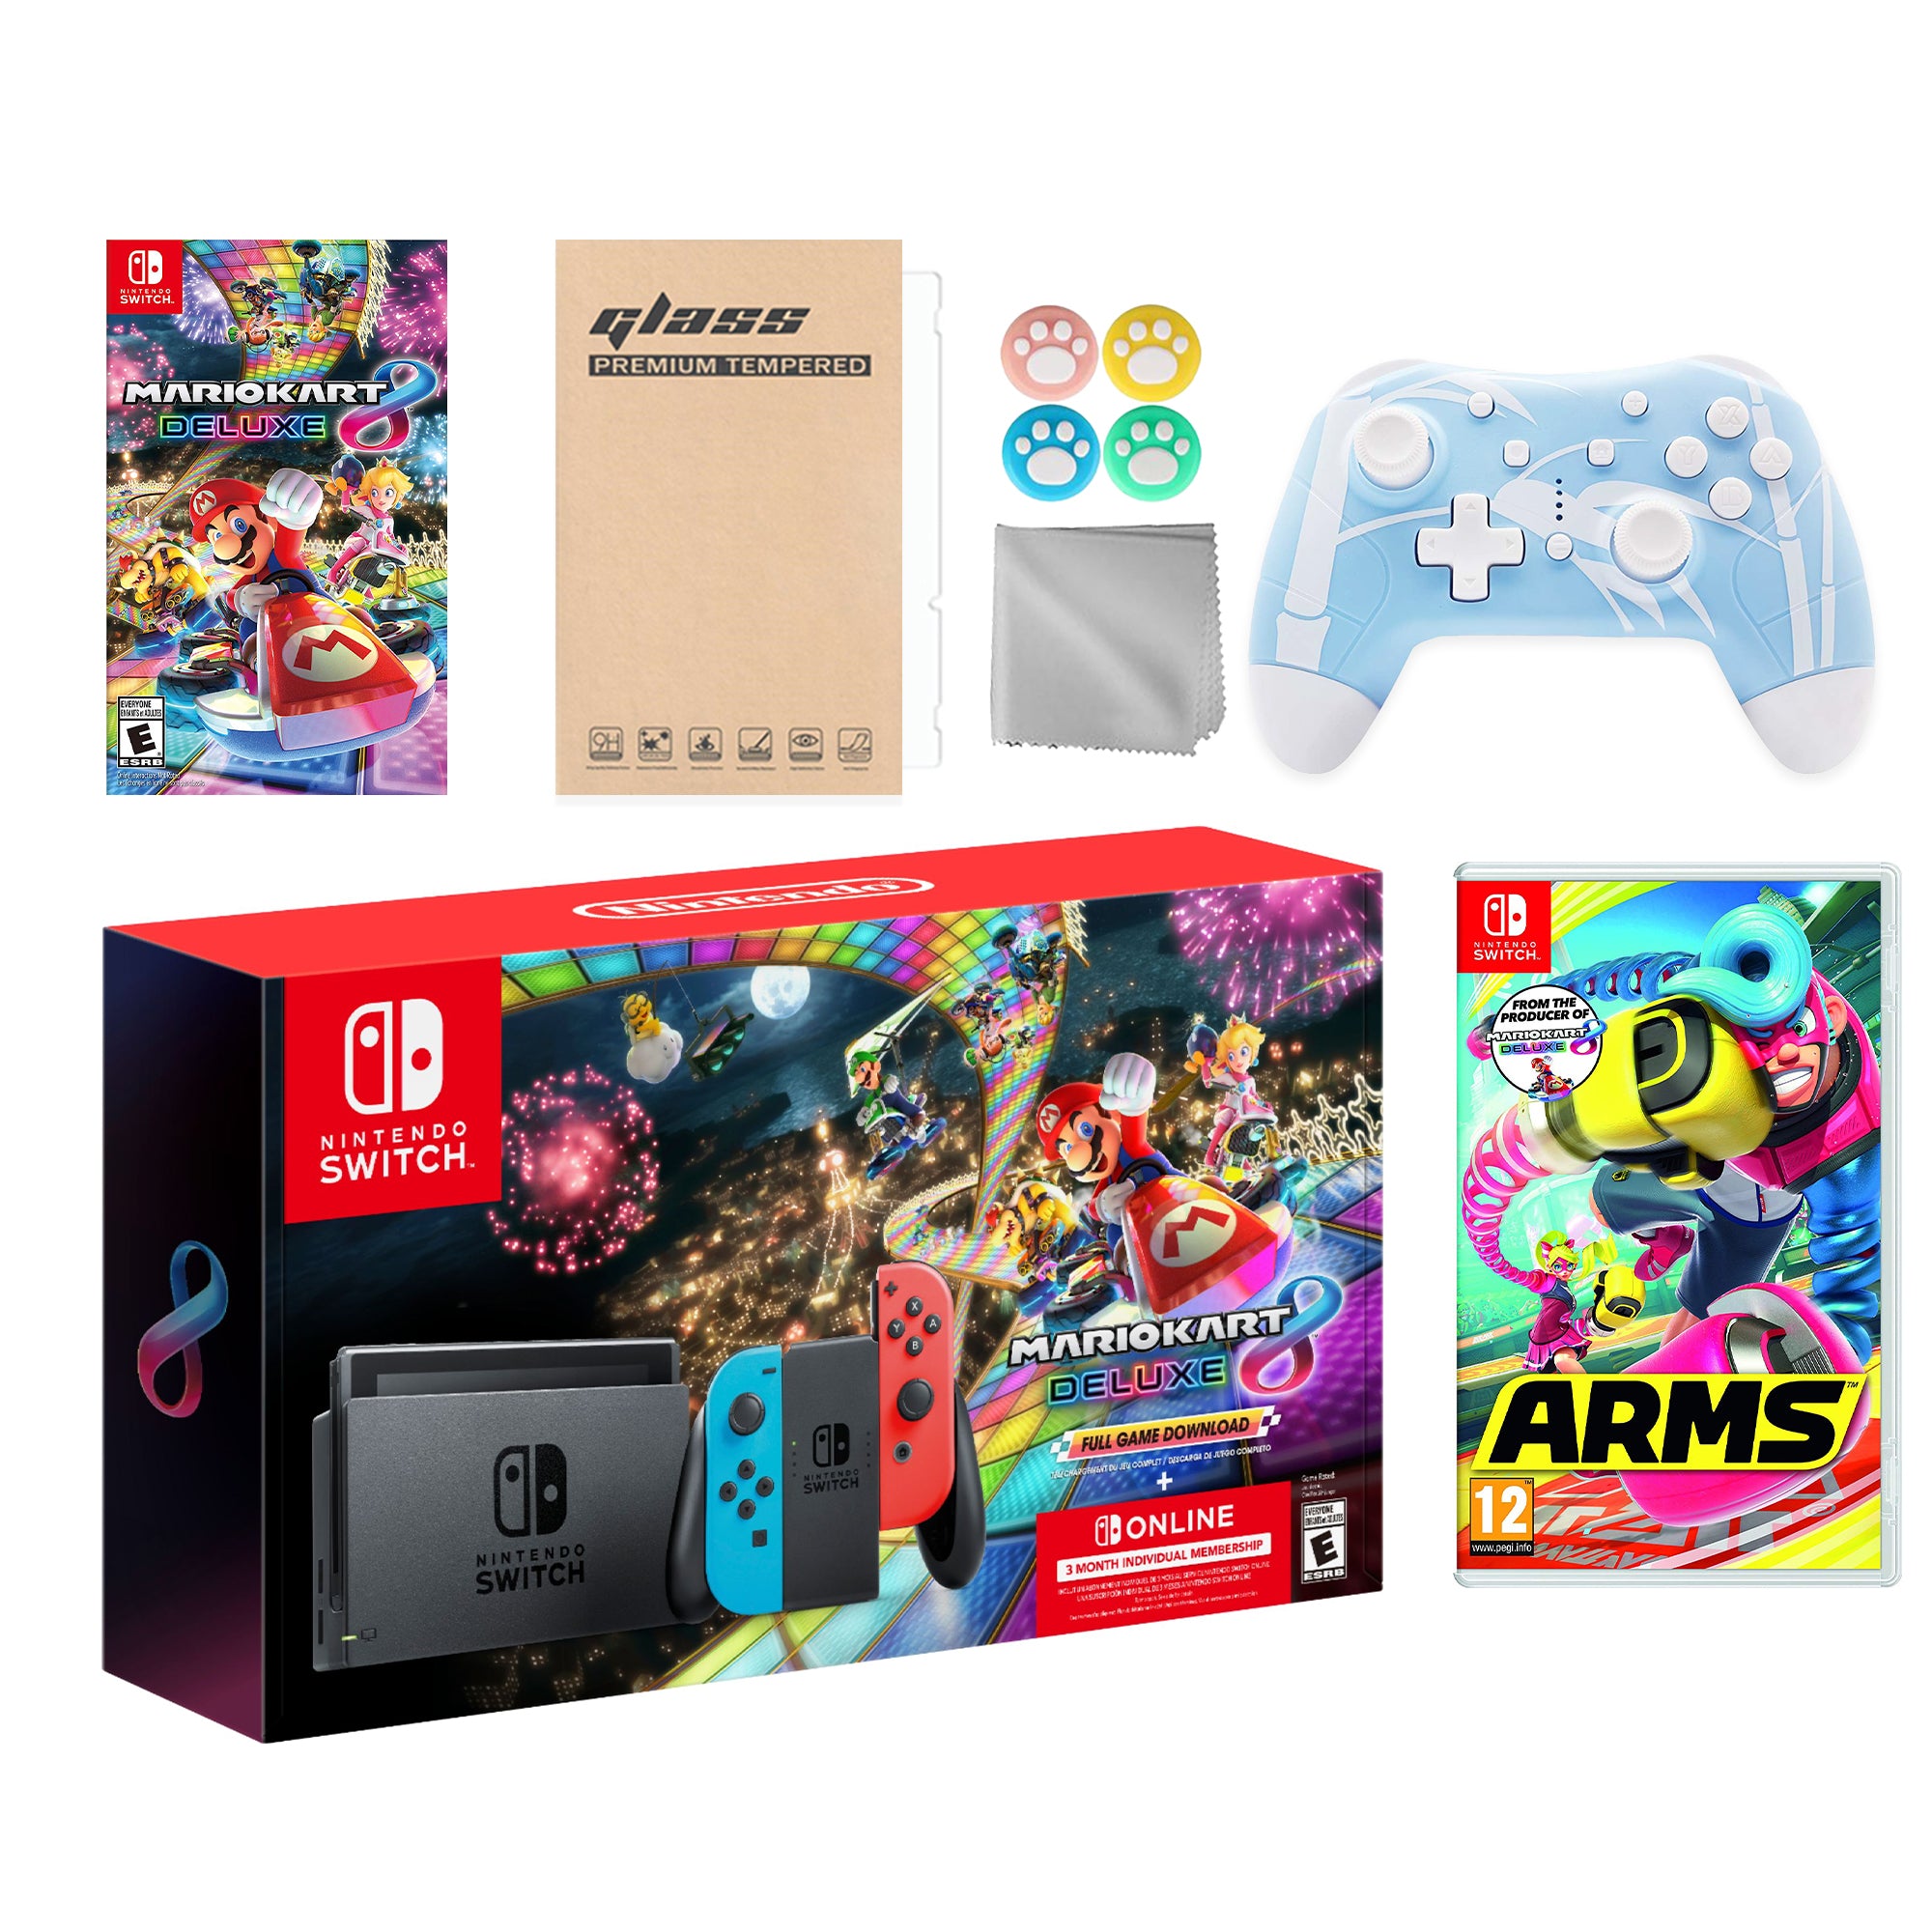 Nintendo Switch Mario Kart 8 Deluxe Bundle: Red Blue Console, Mario Kart 8 & Membership, Arms, Mytrix Wireless Pro Controller Blue Bamboo and Accessories